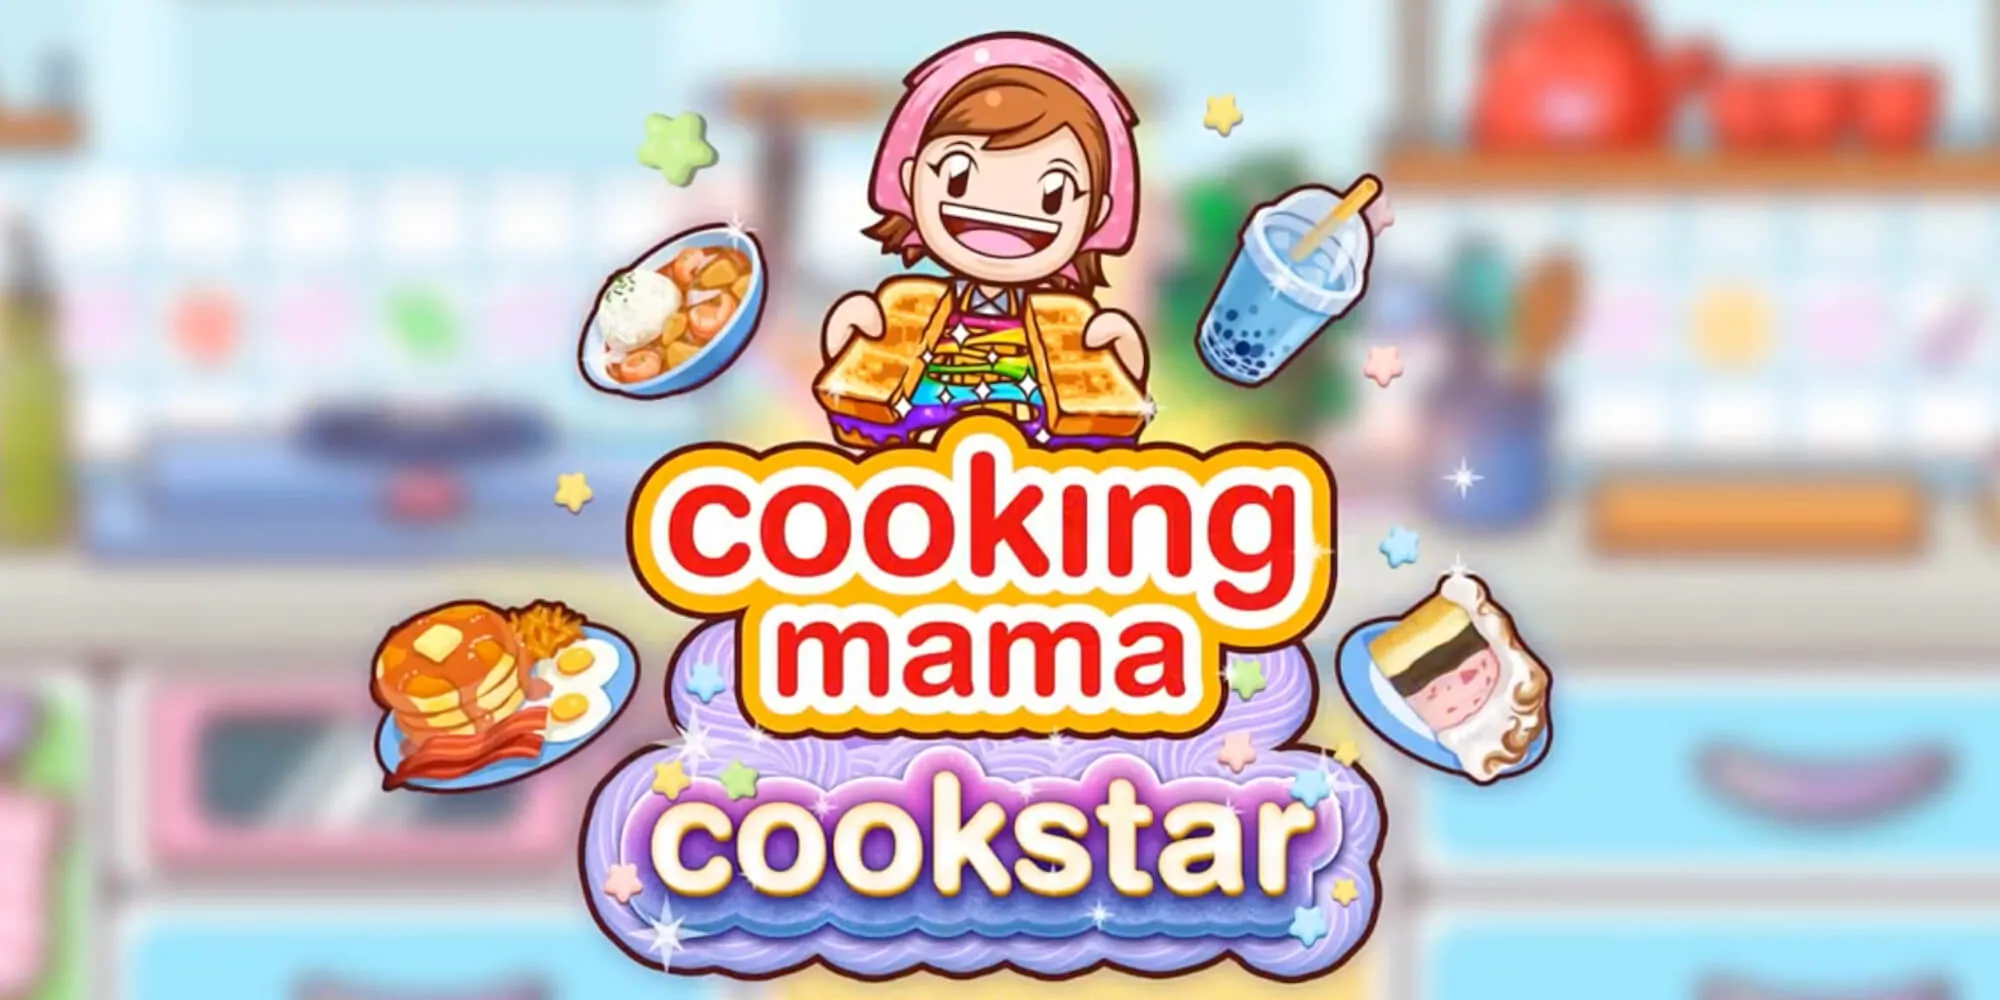 Cooking Mama Cooks Your Switch: The Ongoing Saga